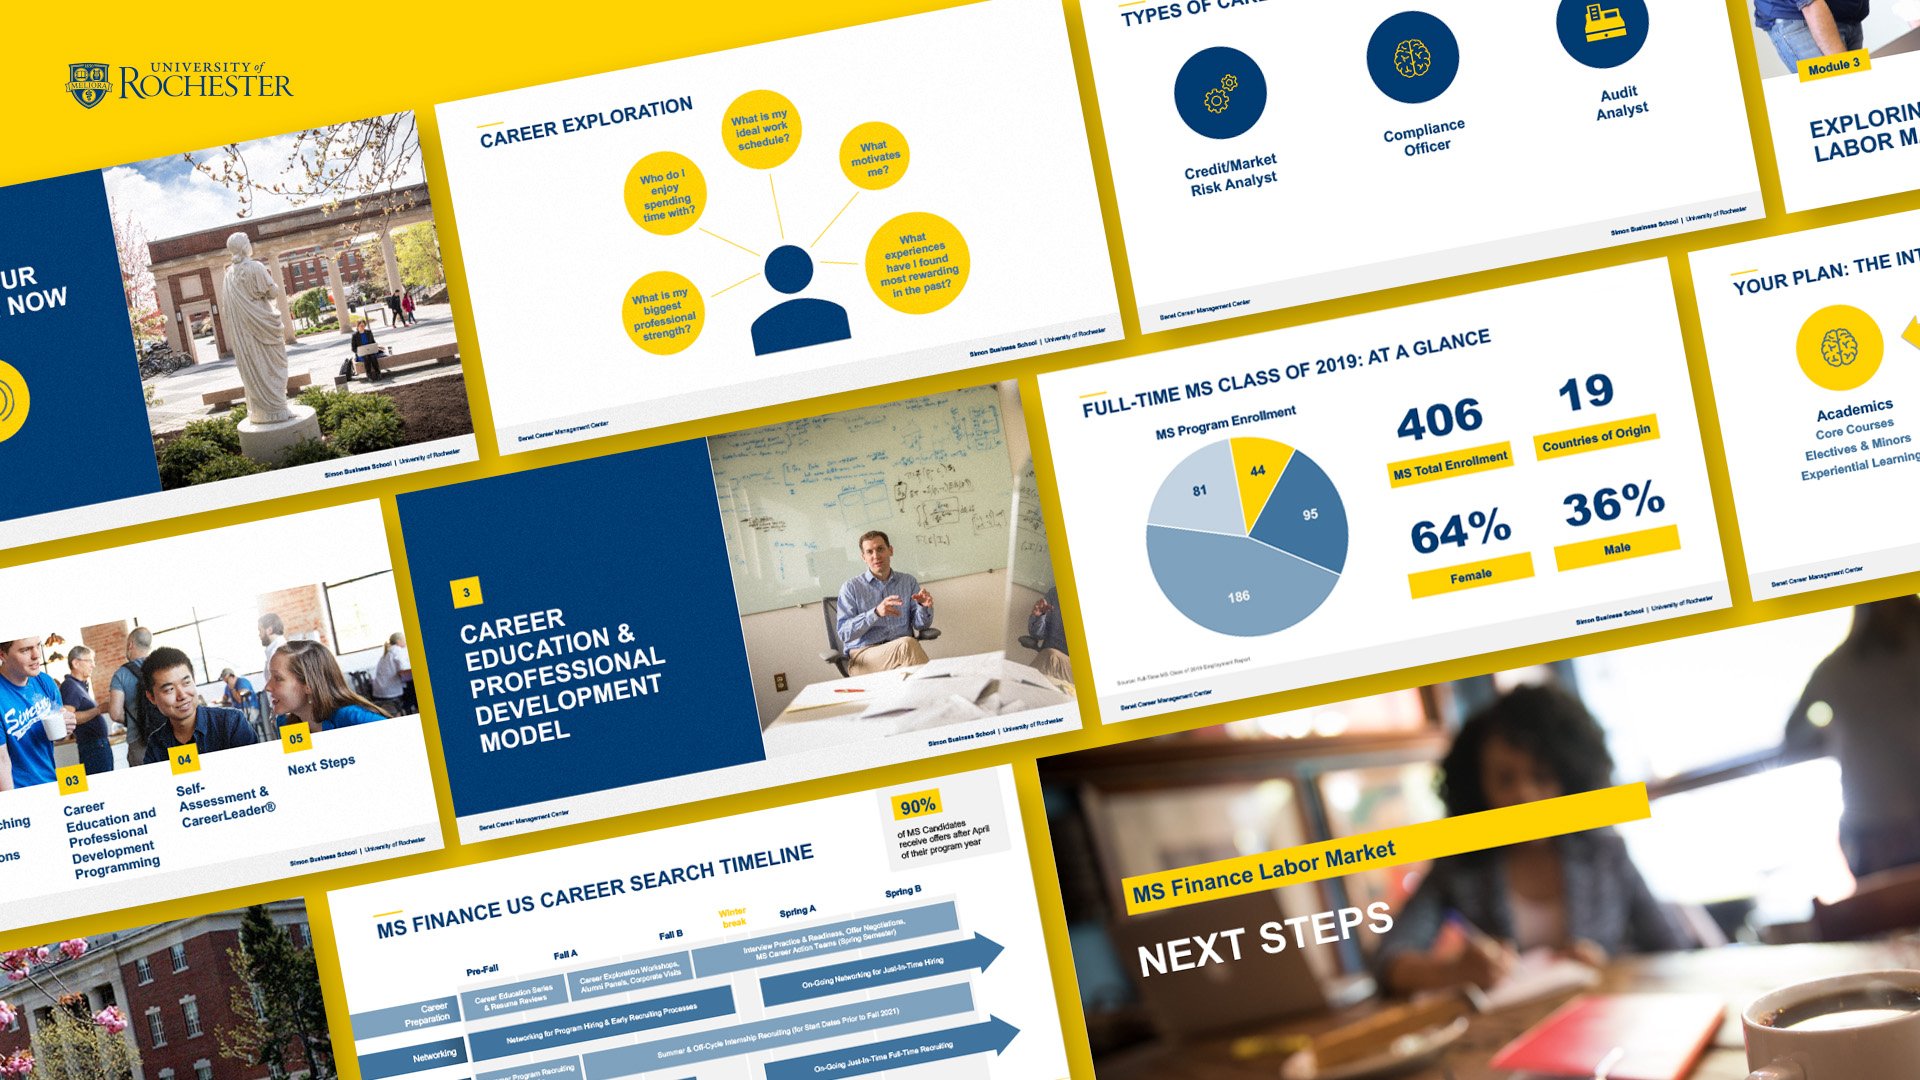 <strong>University of Rochester – Onboarding Incoming Students</strong><small>The Benet Career Management Center tapped Ardent to develop a visual redesign of their onboarding program templates. In addition, we also provided consultation to streamline their content for incoming students.</small>